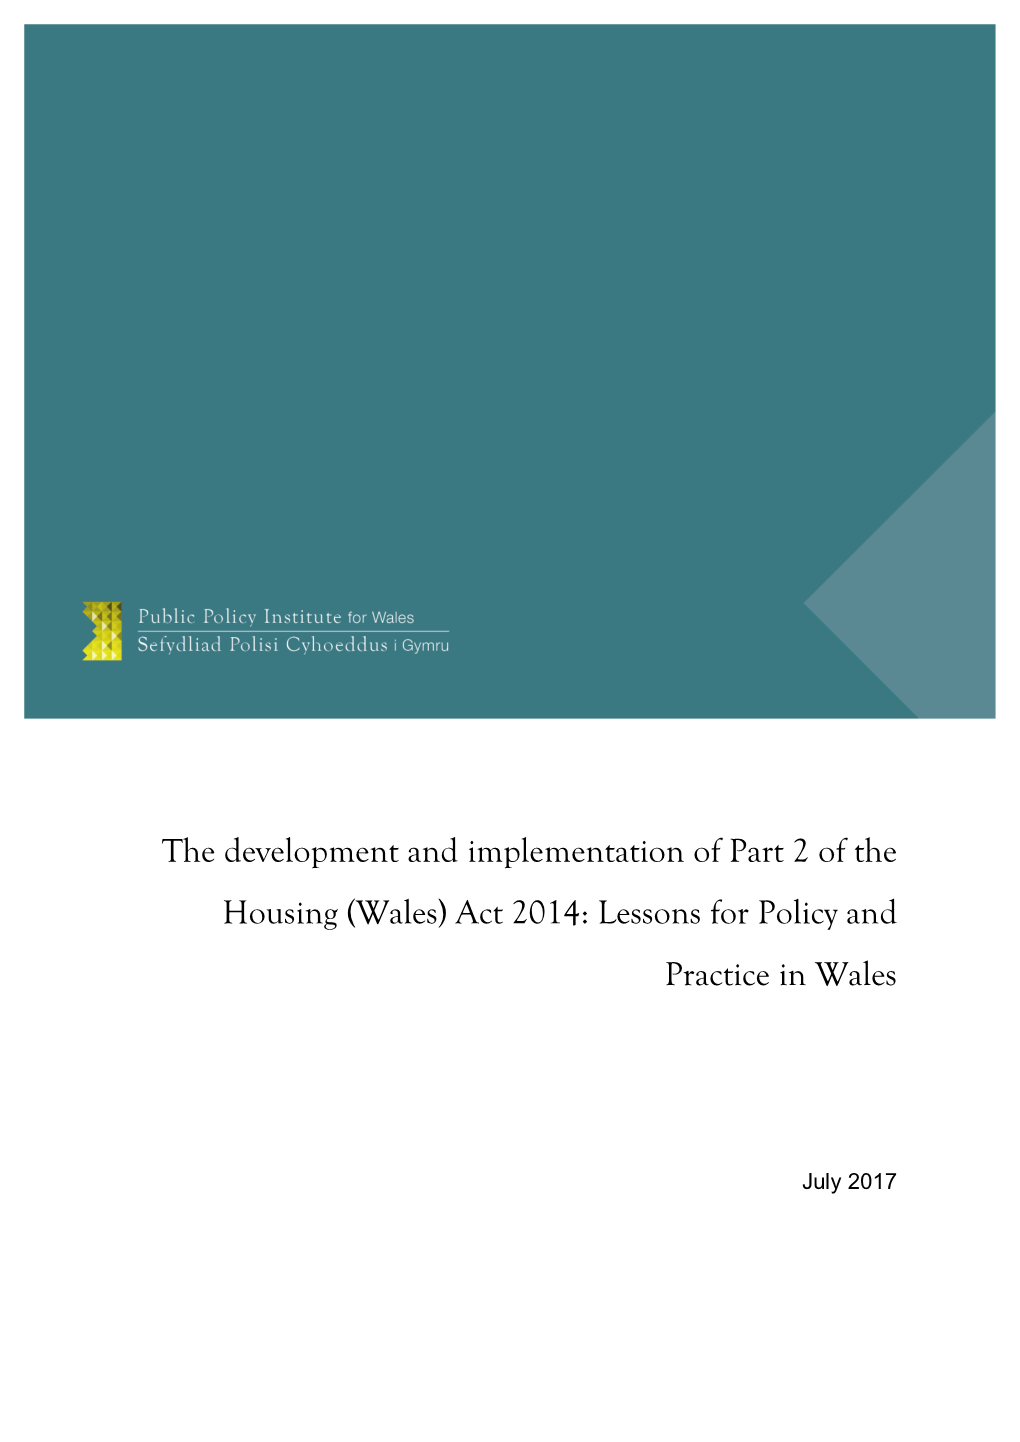 (Wales) Act 2014: Lessons for Policy and Practice in Wales